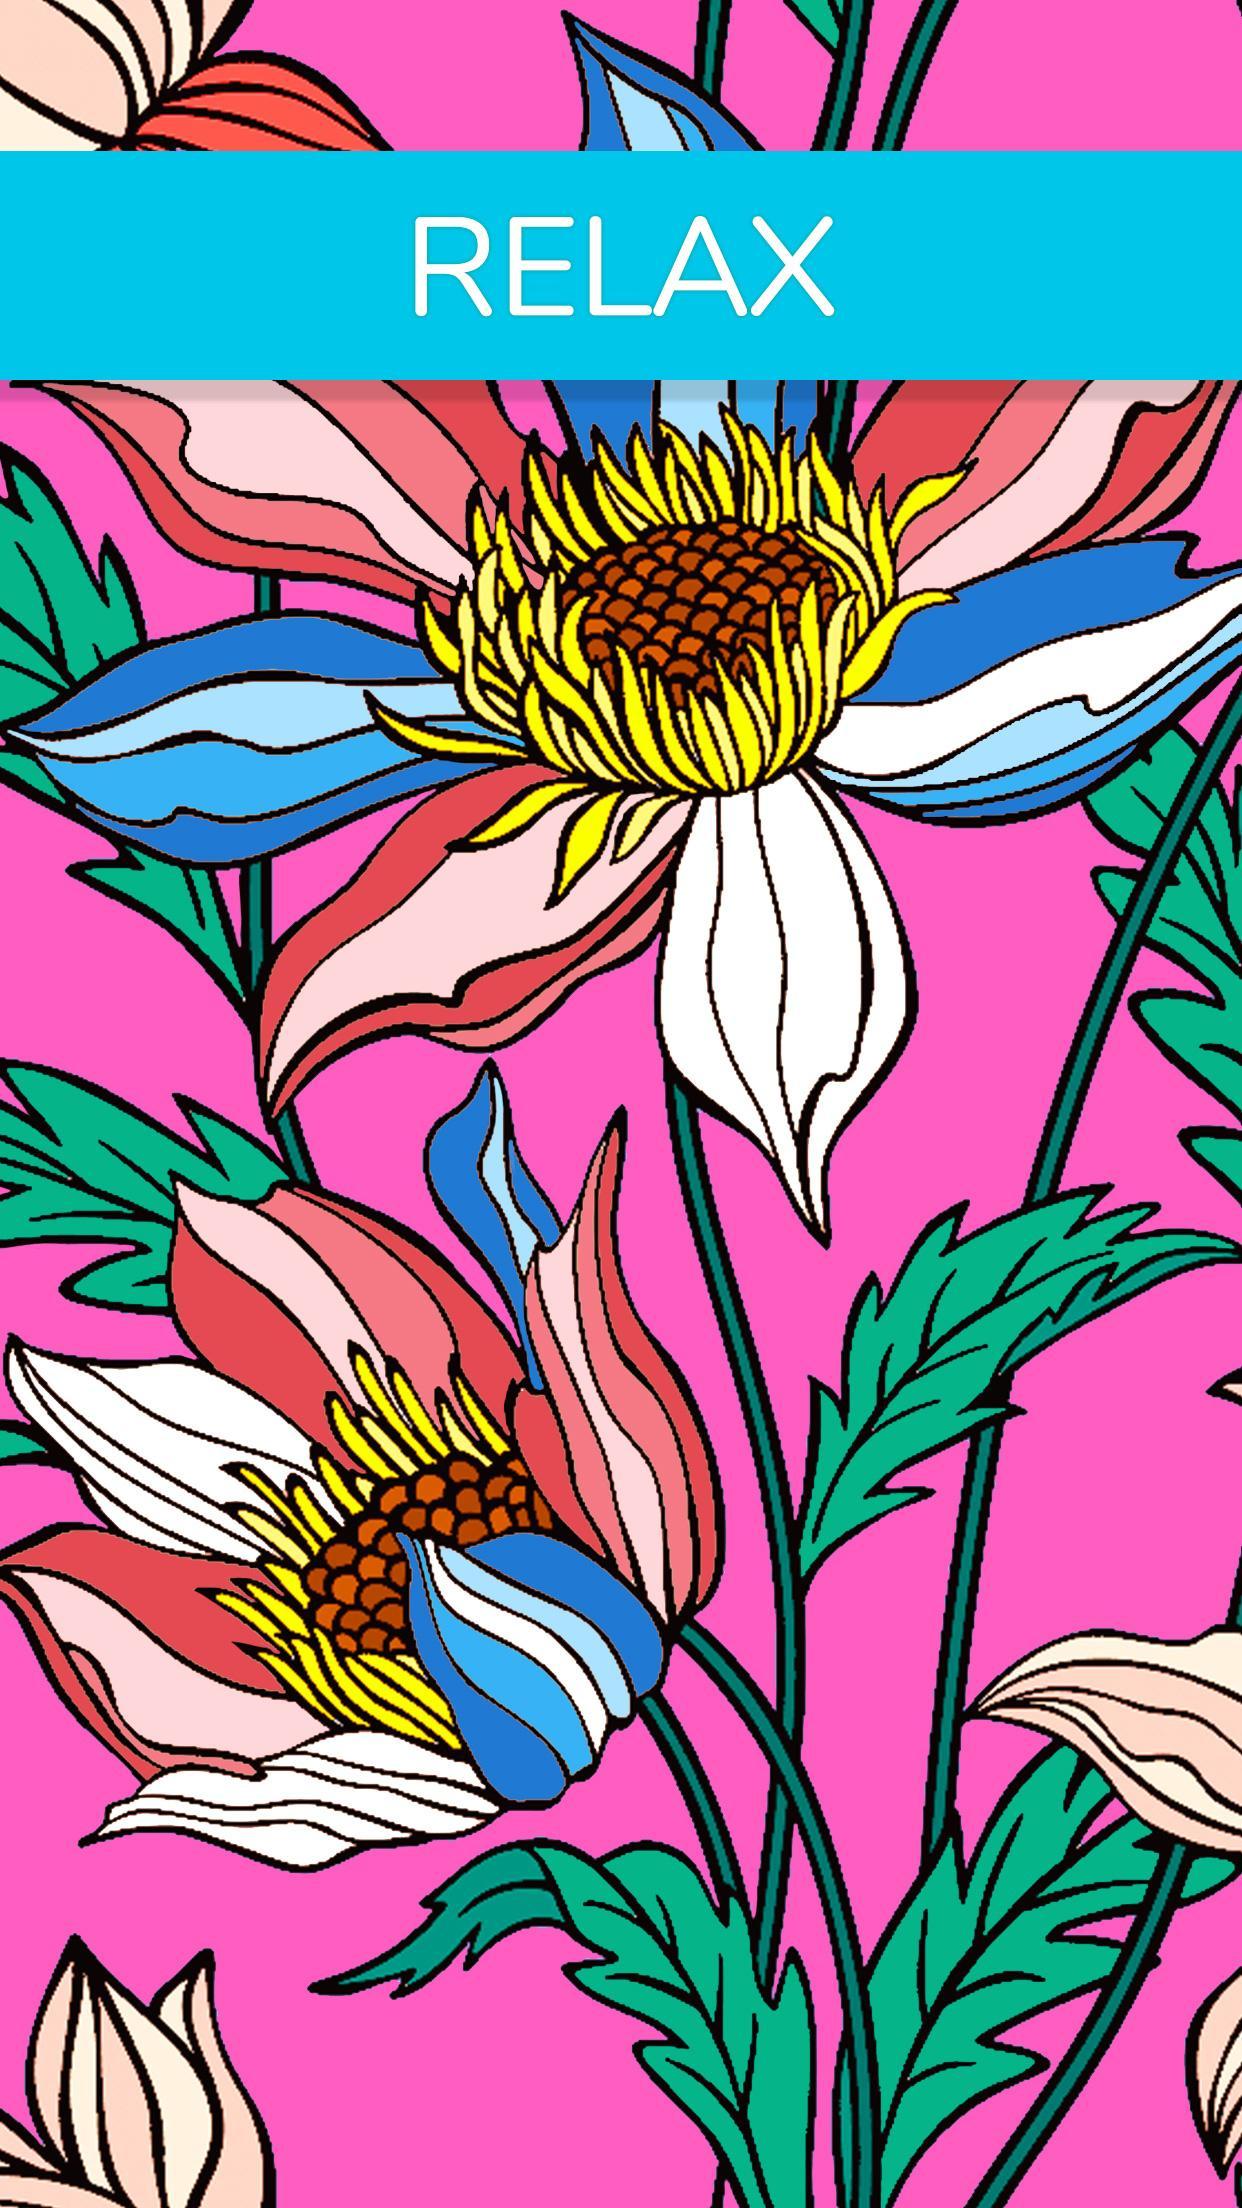 Free Coloring Book for Adults App for Android - APK Download